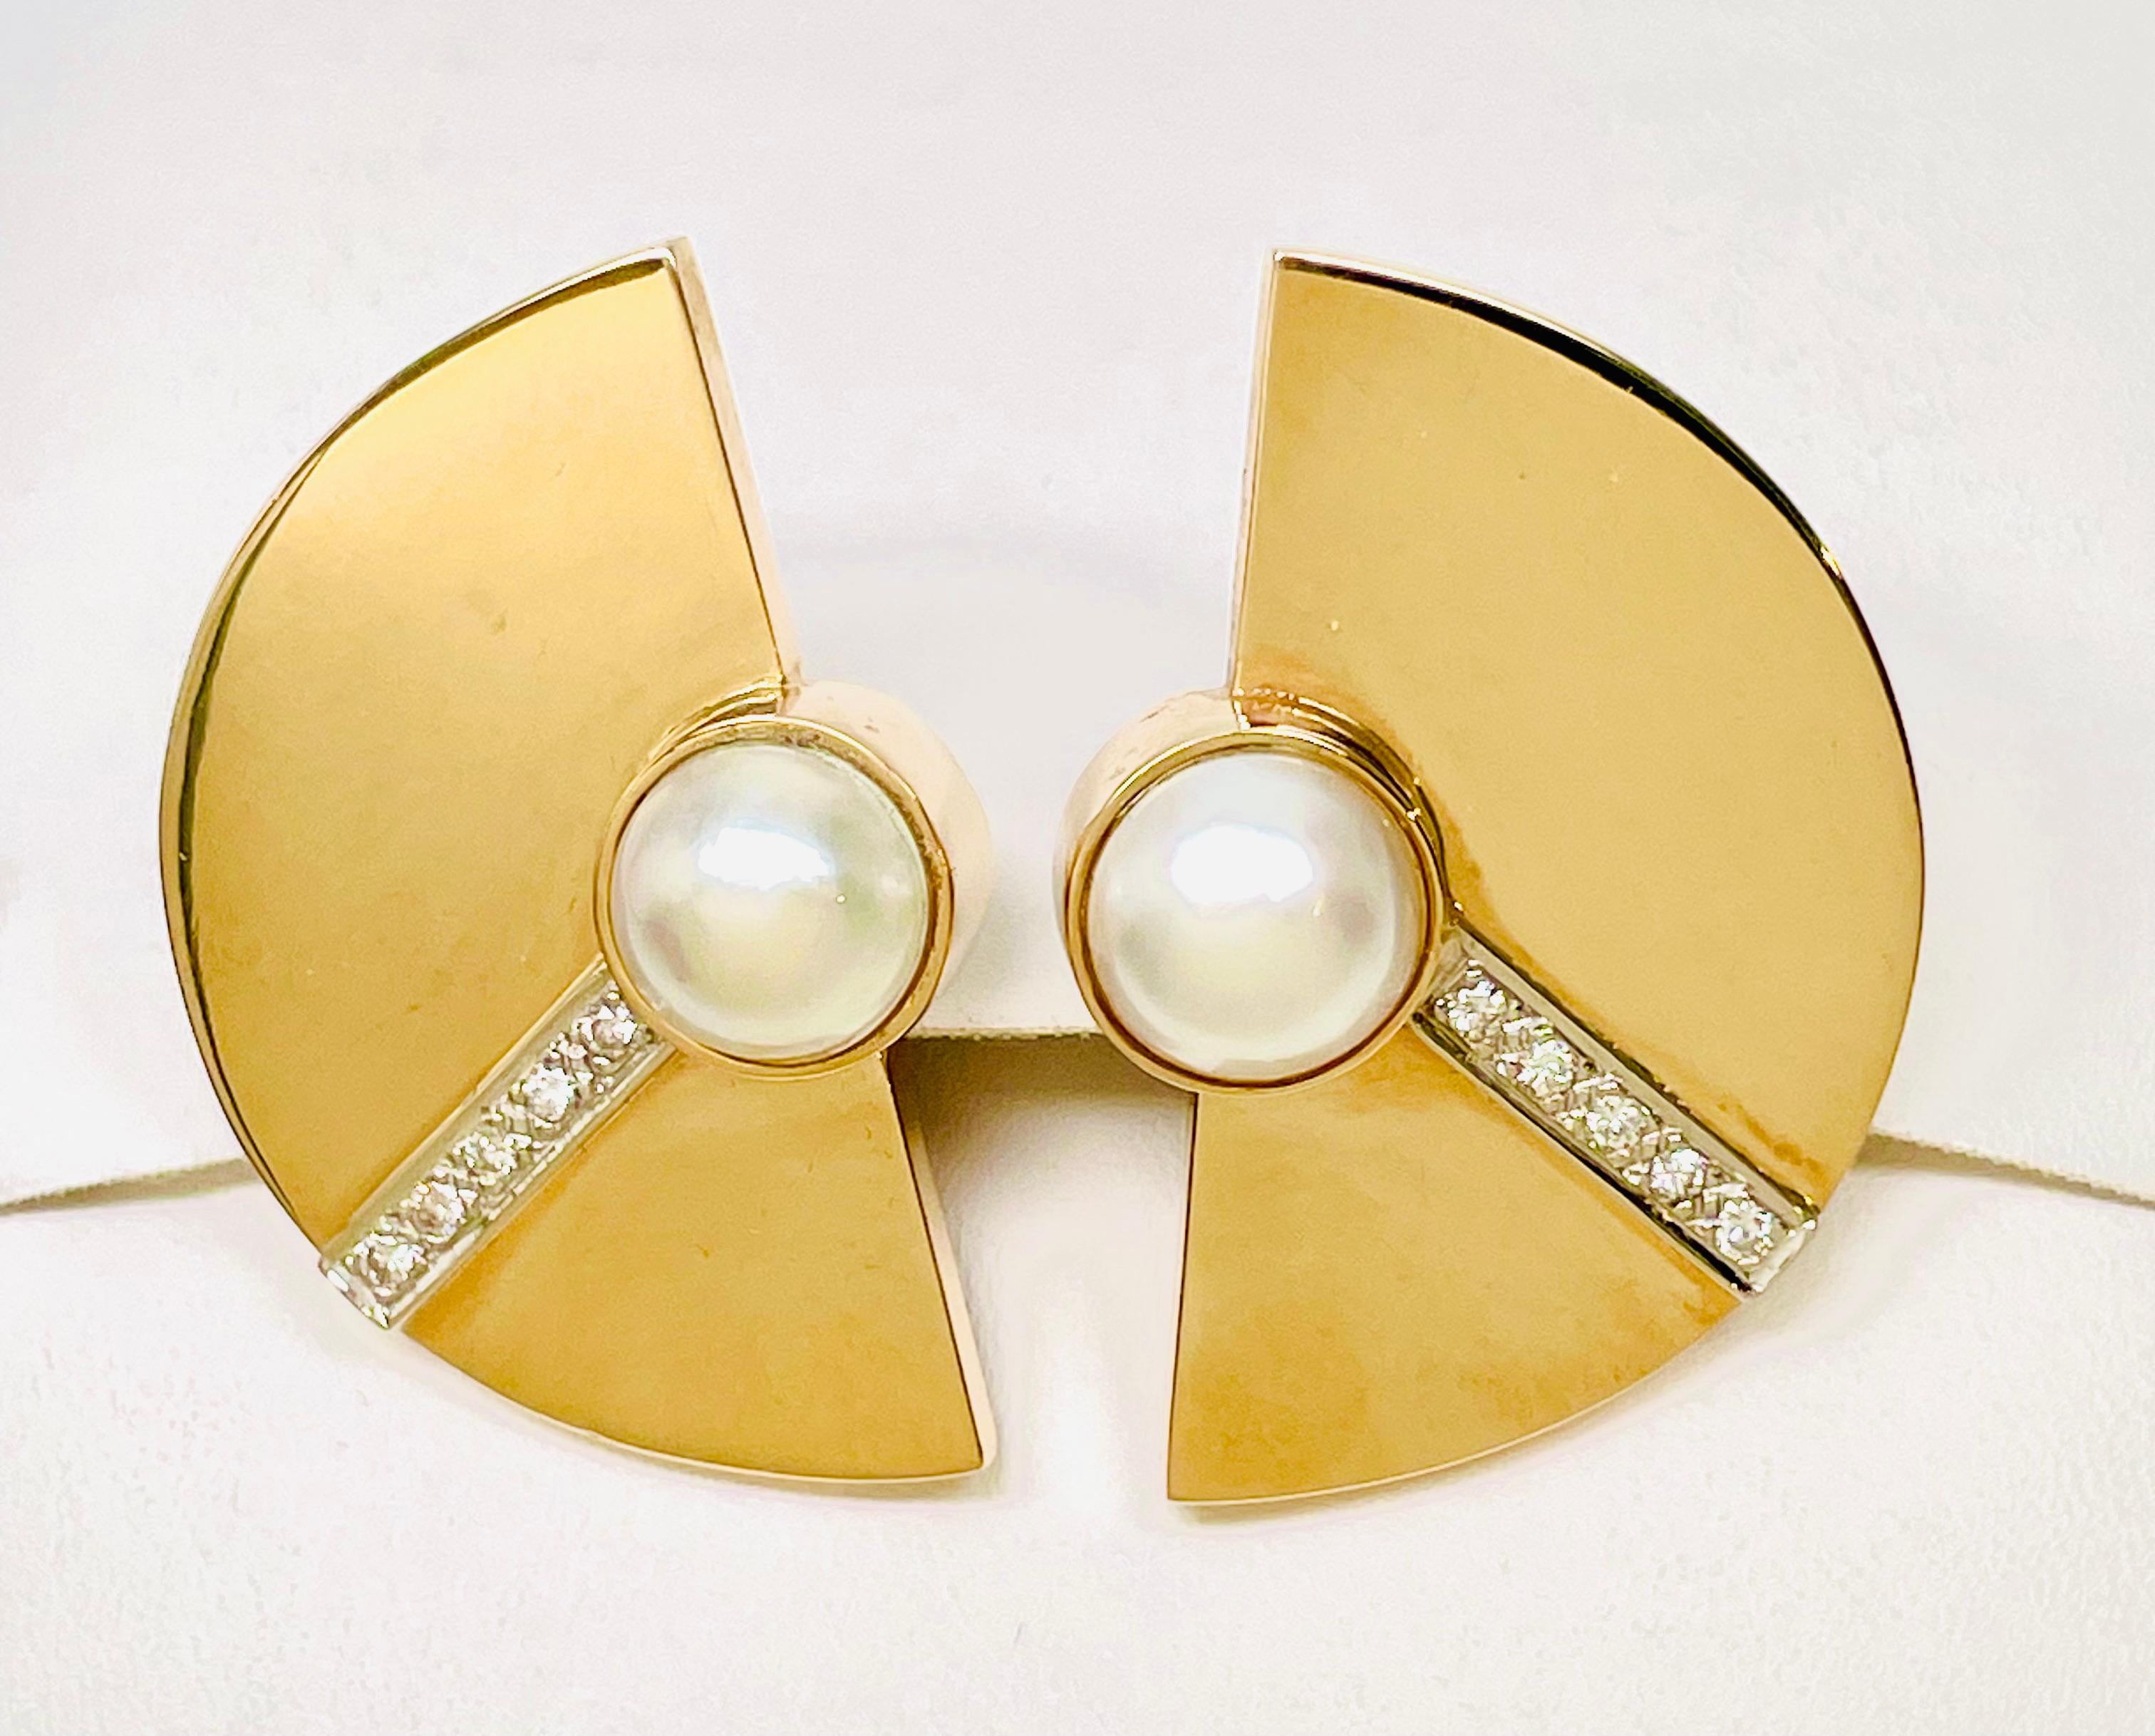 These fabulous LARGE one-of-a-kind statement earrings are polished to a mirror finish. (Difficult to take photos because of the reflections!)  Custom made in 1991 by jewelry artist Marcy Feldman for Heartwear Designs. They are 14kt. Yellow Gold half